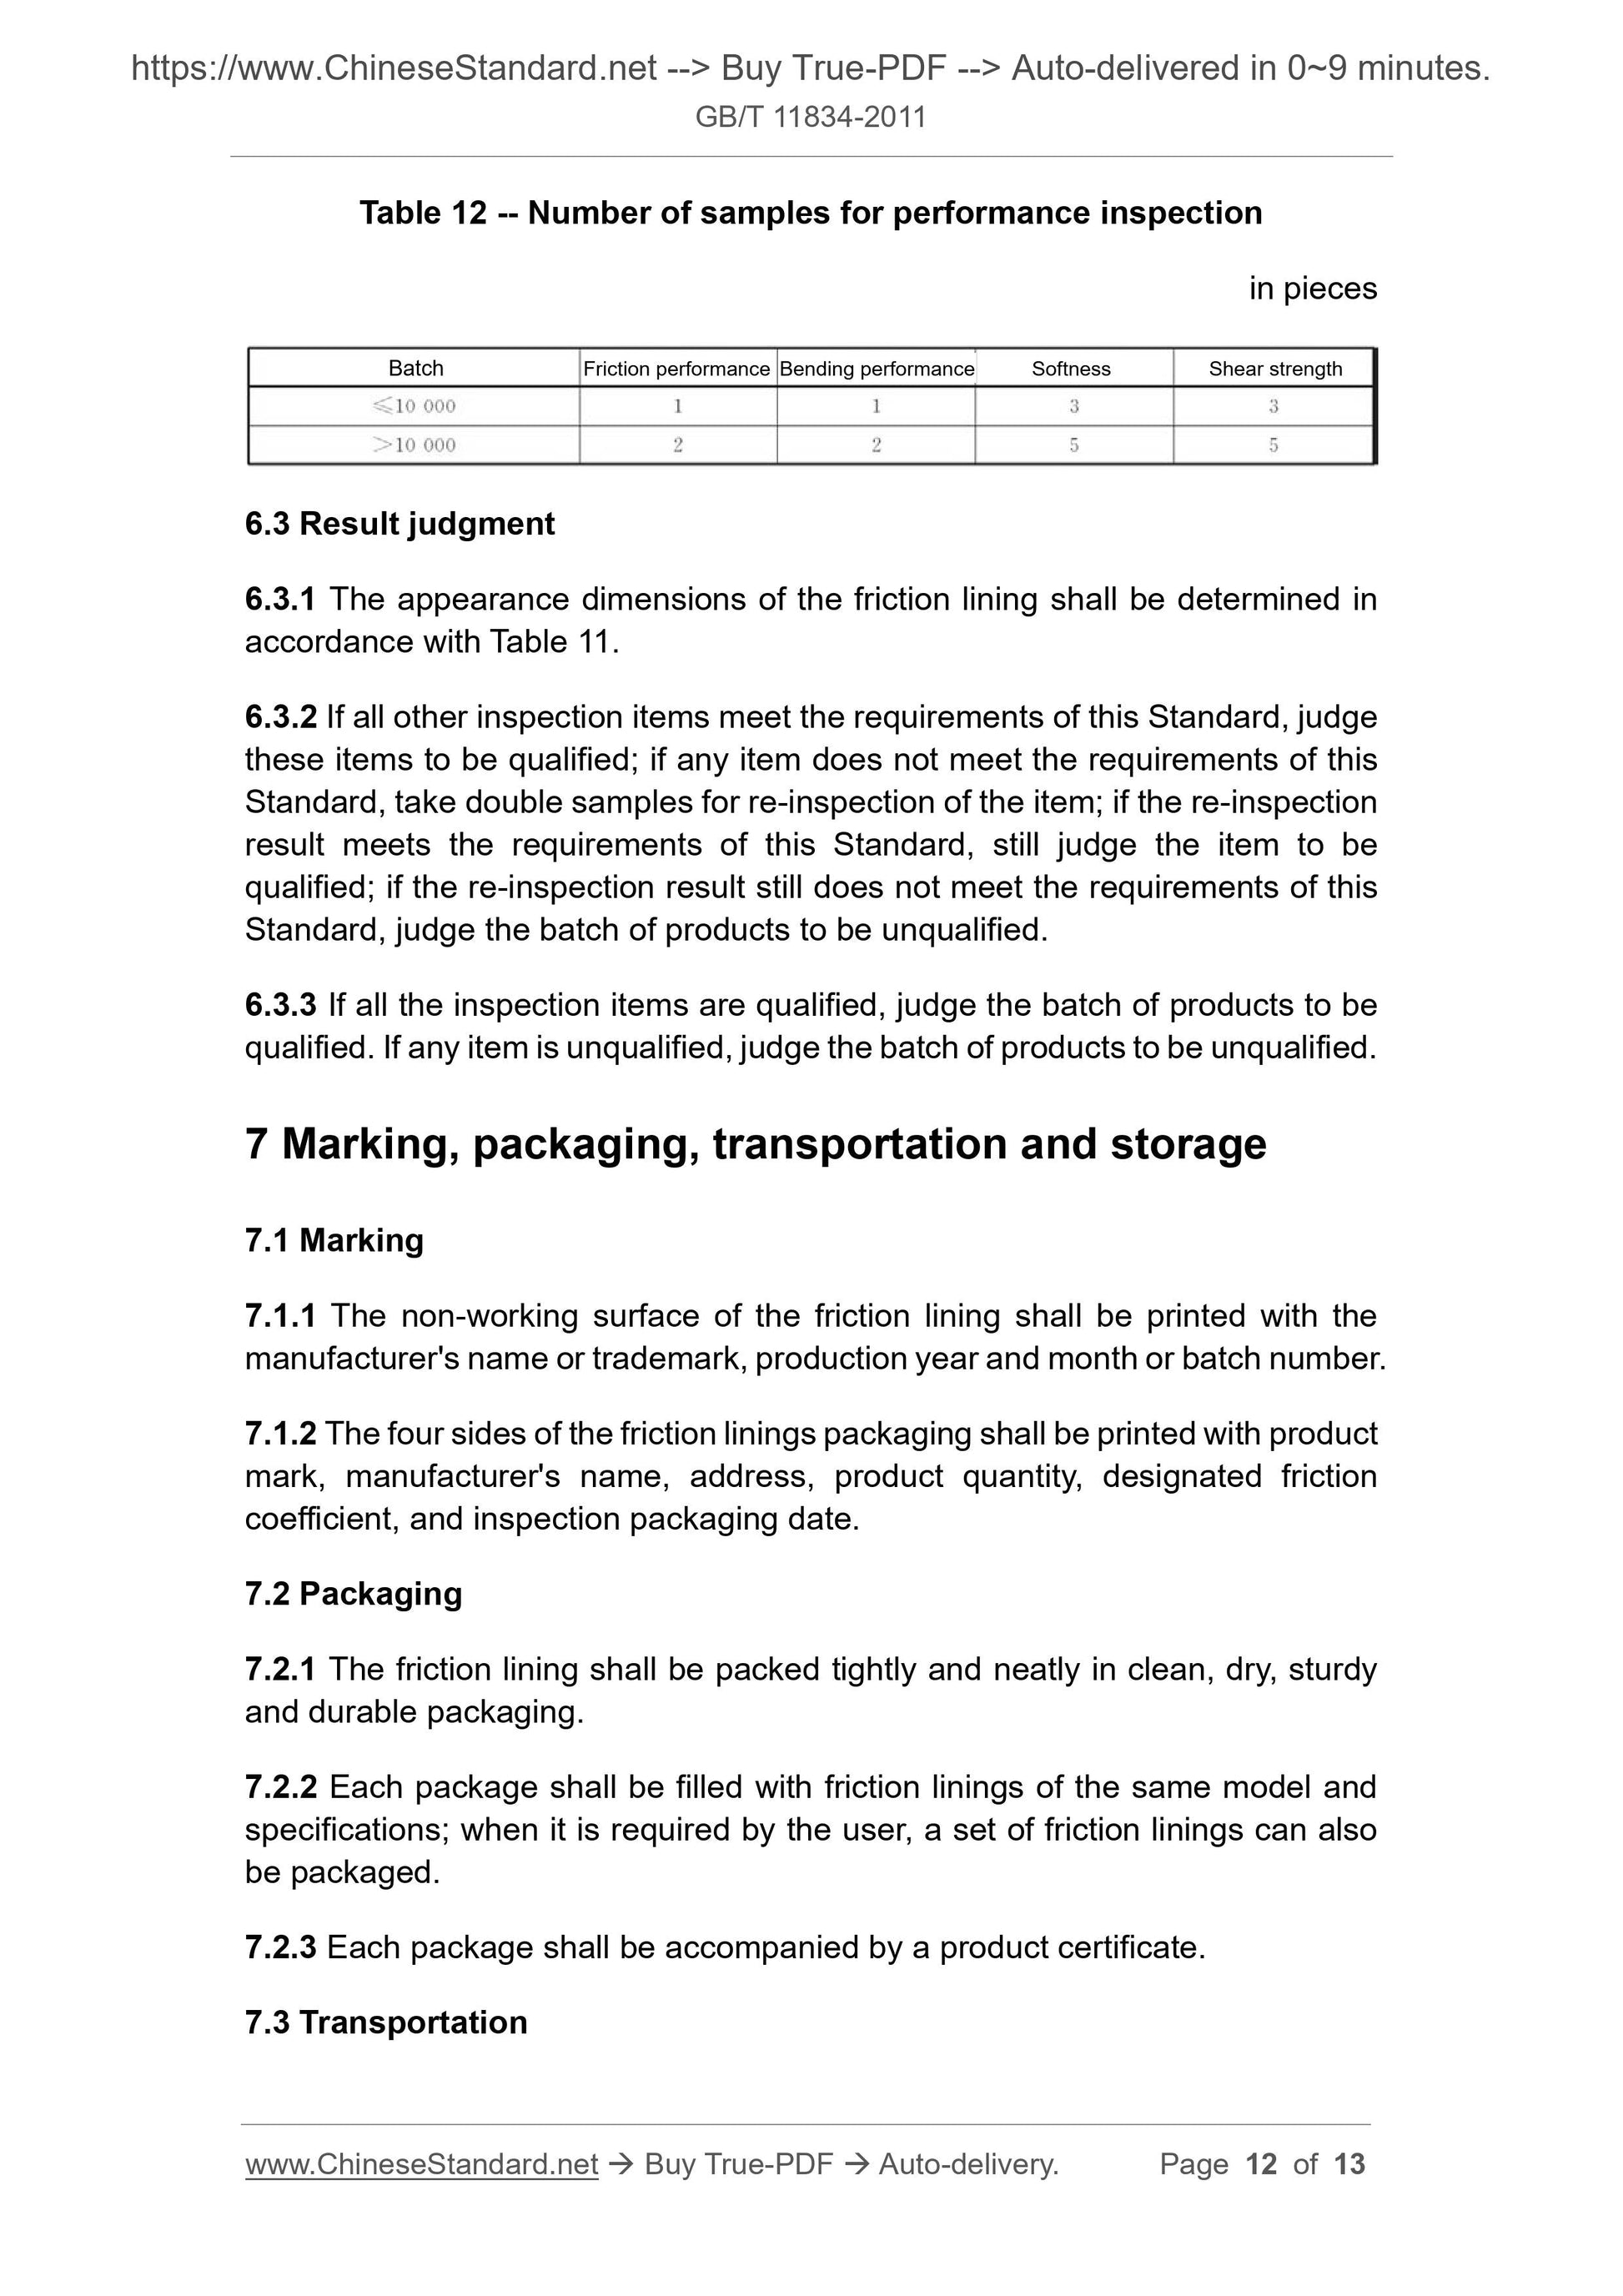 GB/T 11834-2011 Page 6